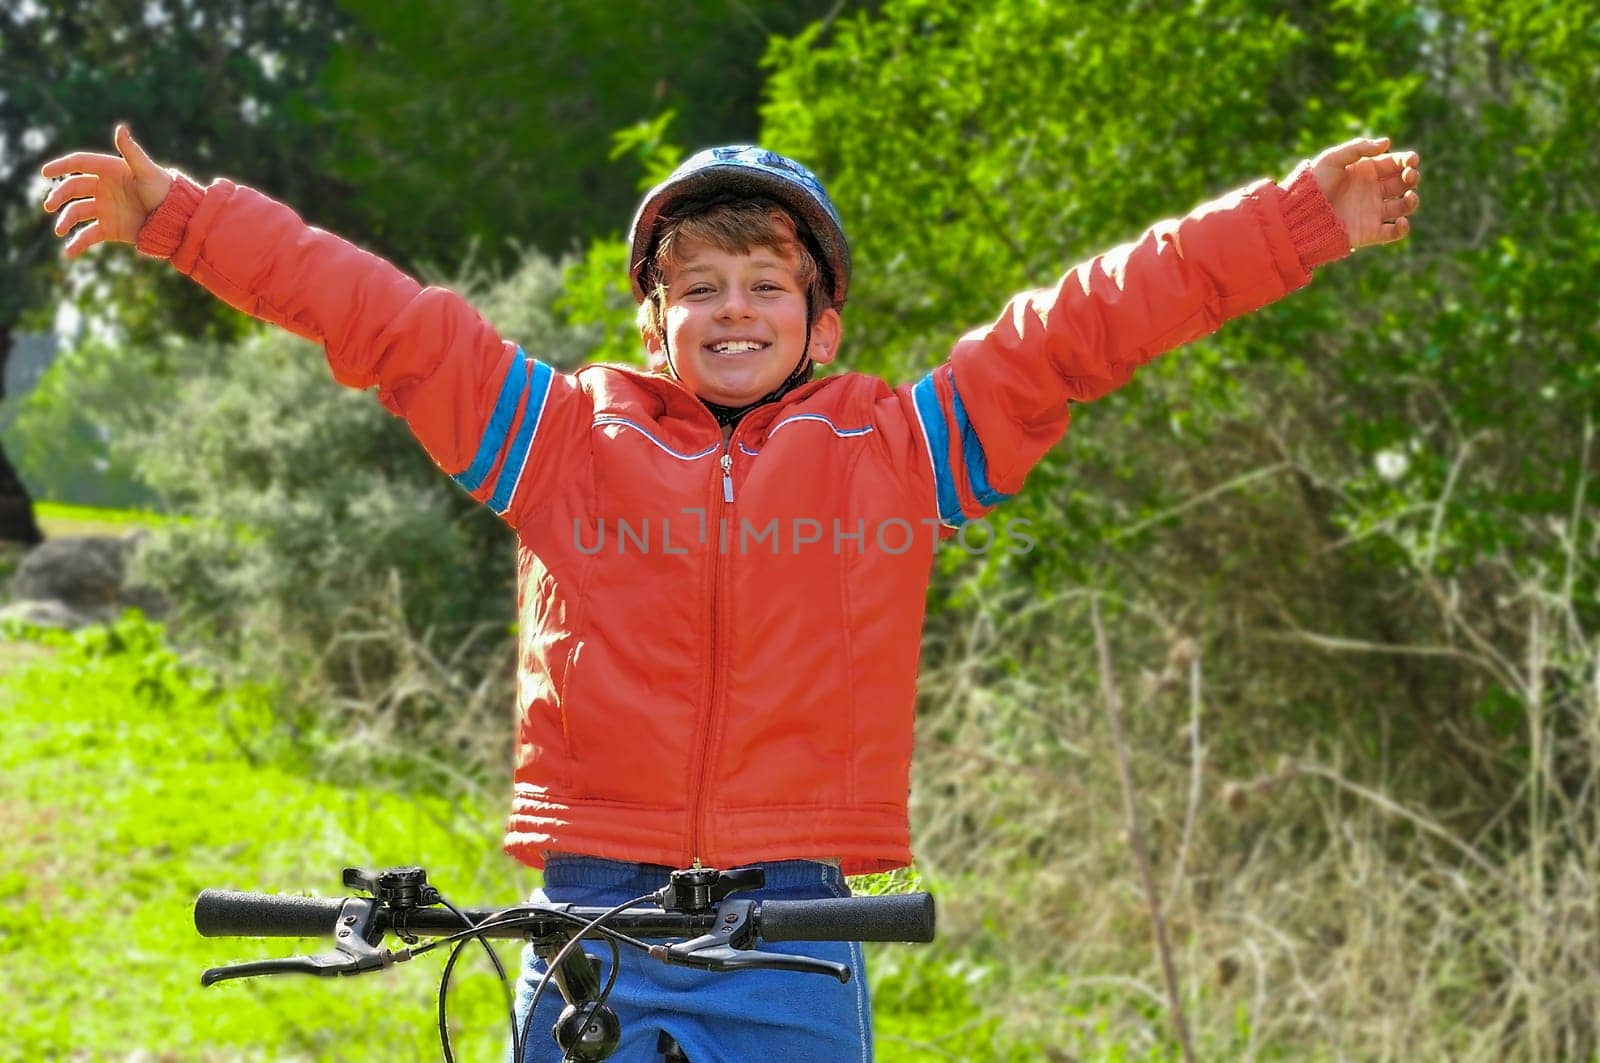 A boy rejoices after winning a bicycle race at a school competition